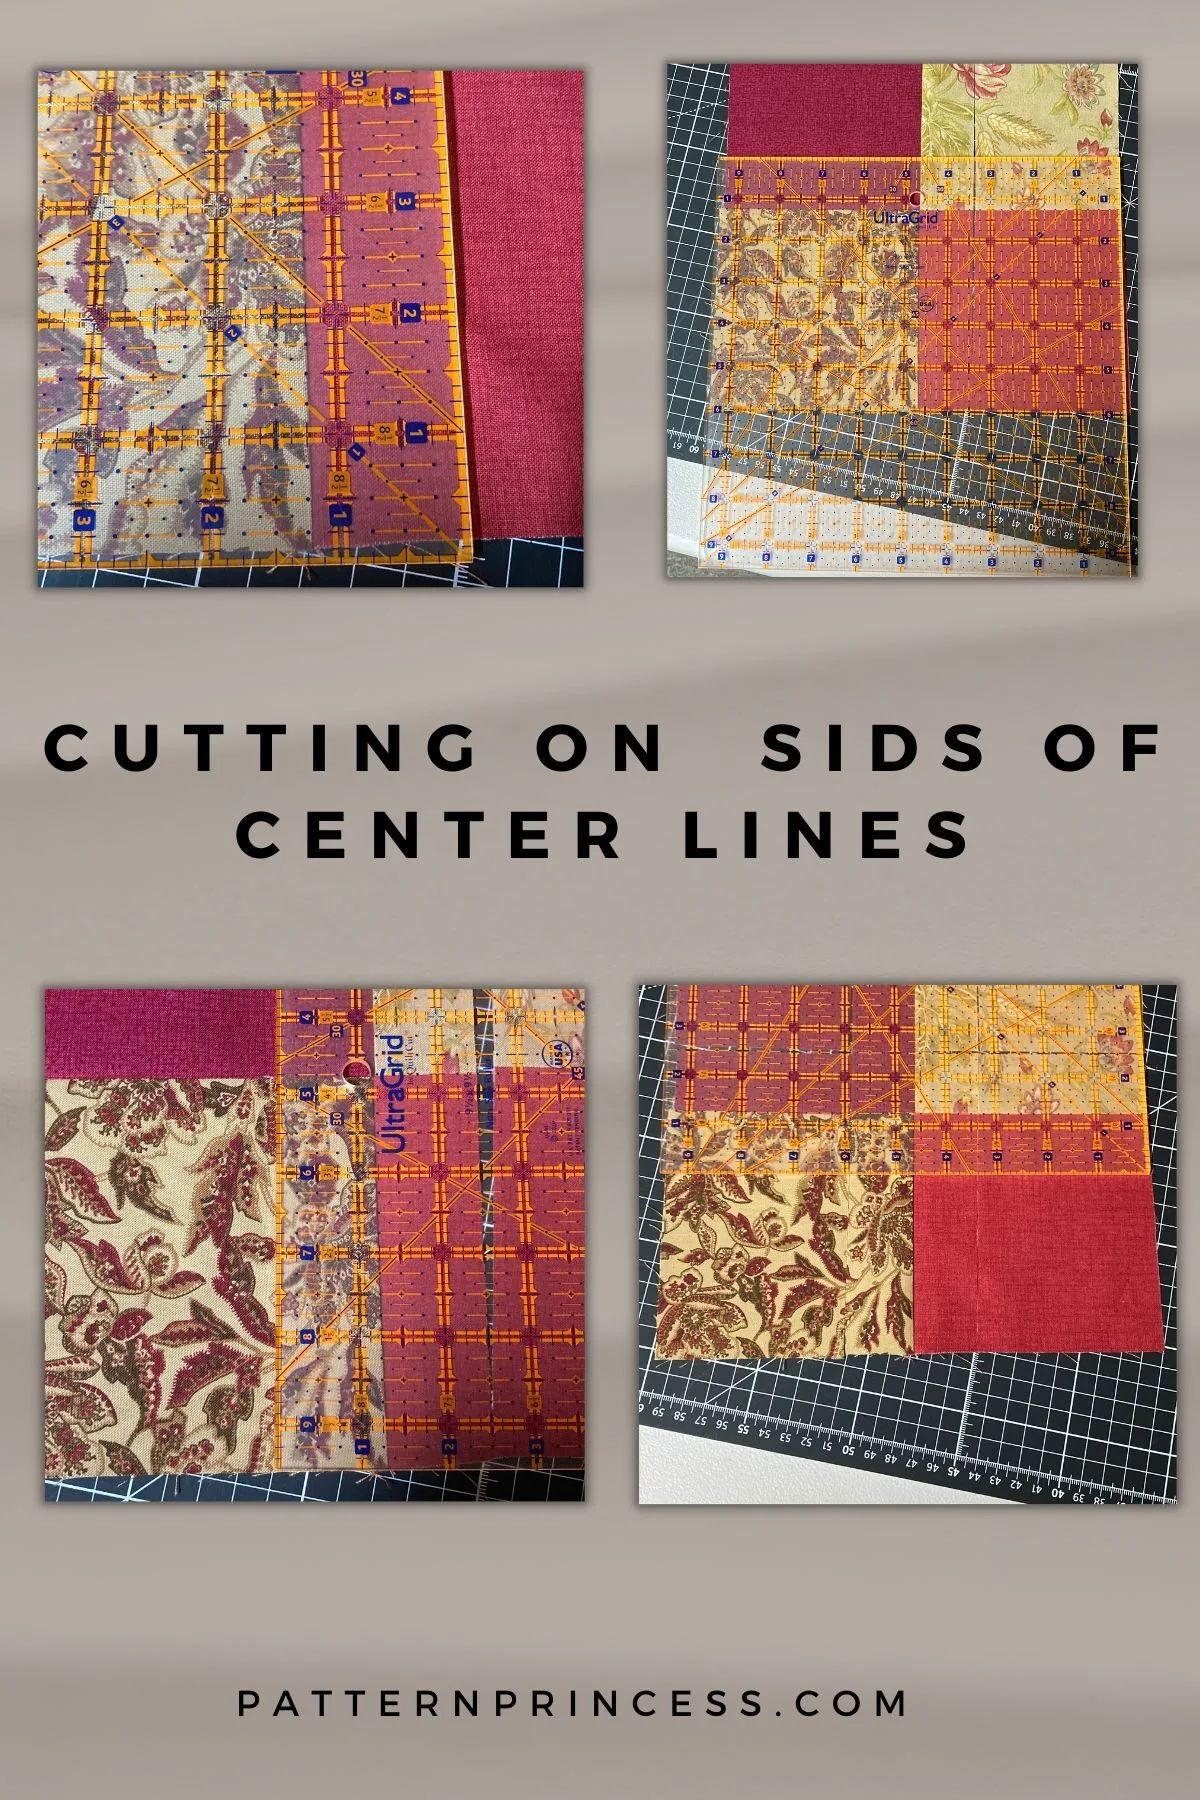 Cutting on Sides of Center Lines